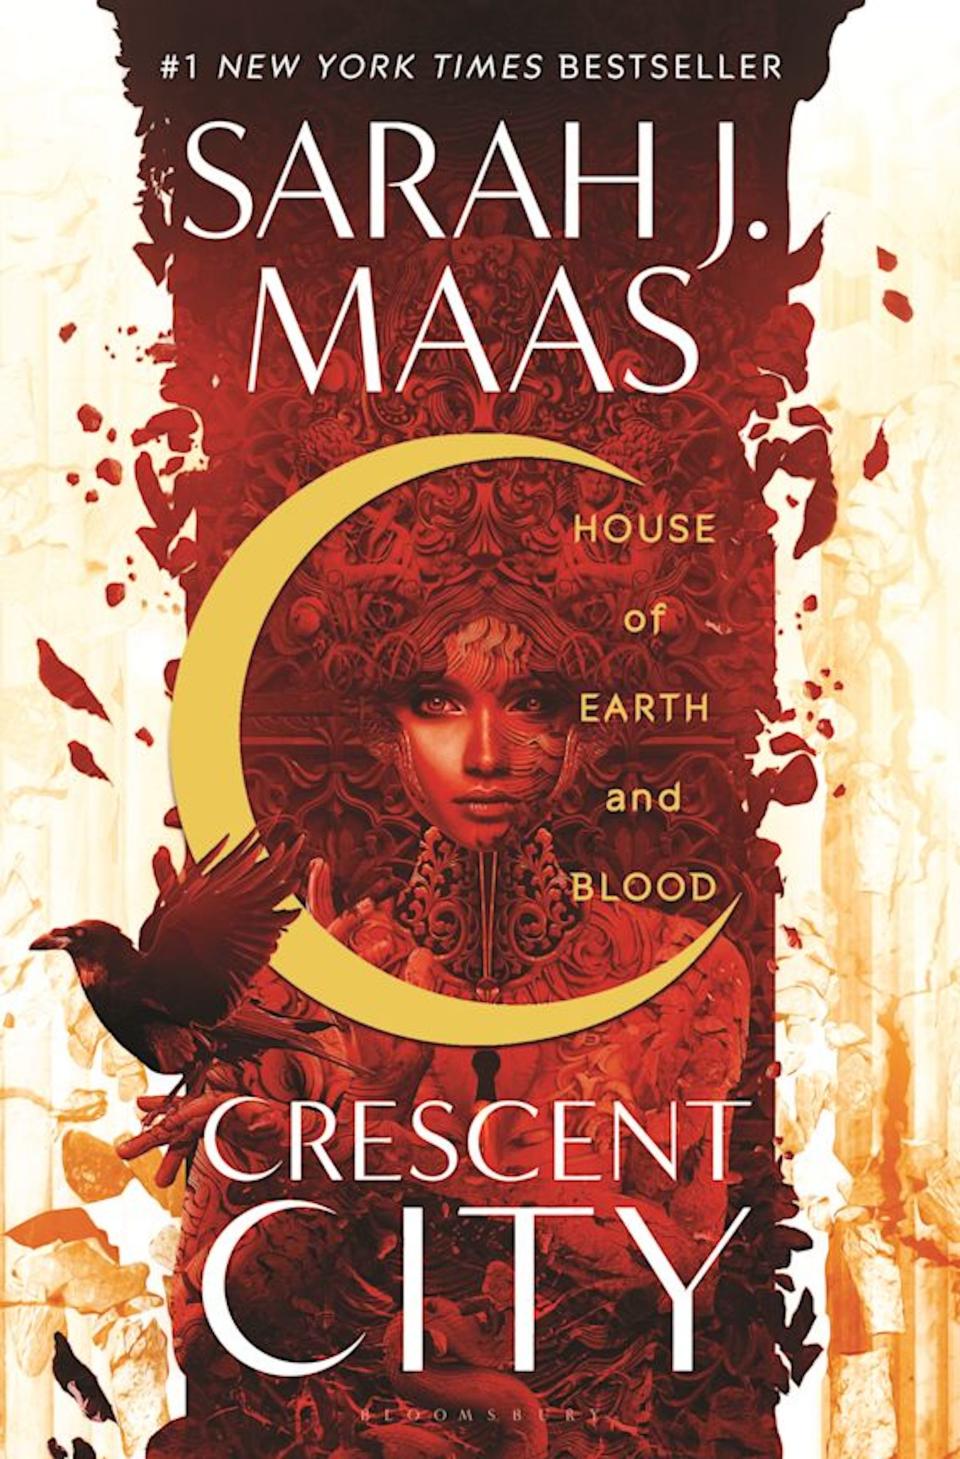 The cover of "House of Earth and Blood" by Sarah J. Maas.